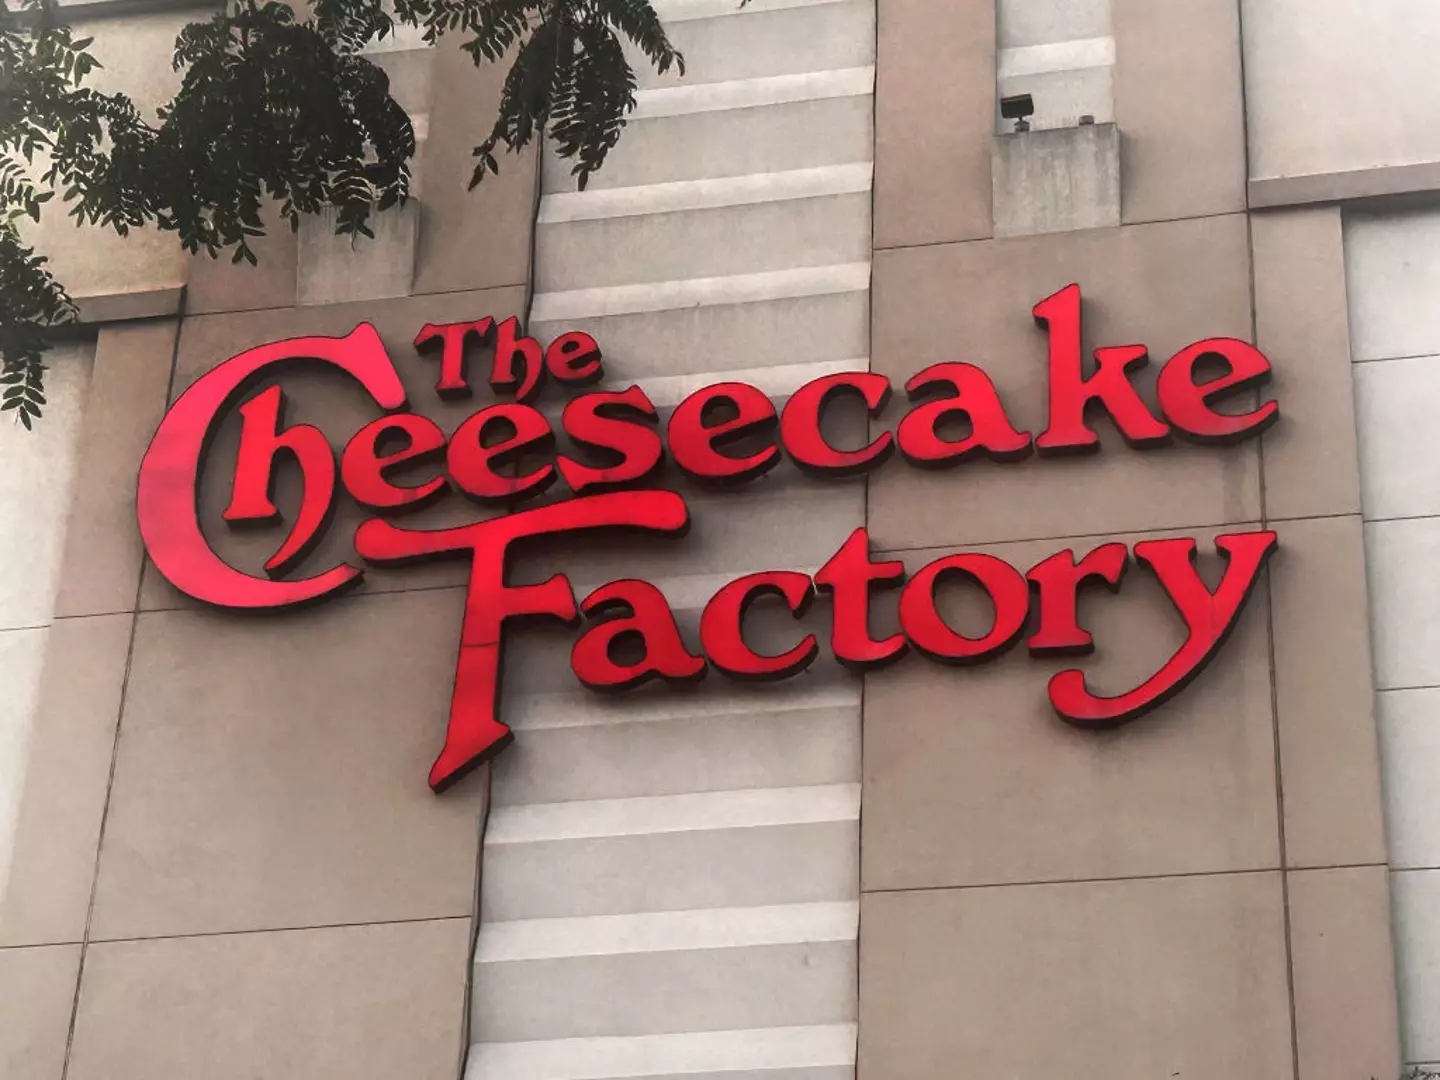 People were impressed at the note from The Cheesecake Factory.